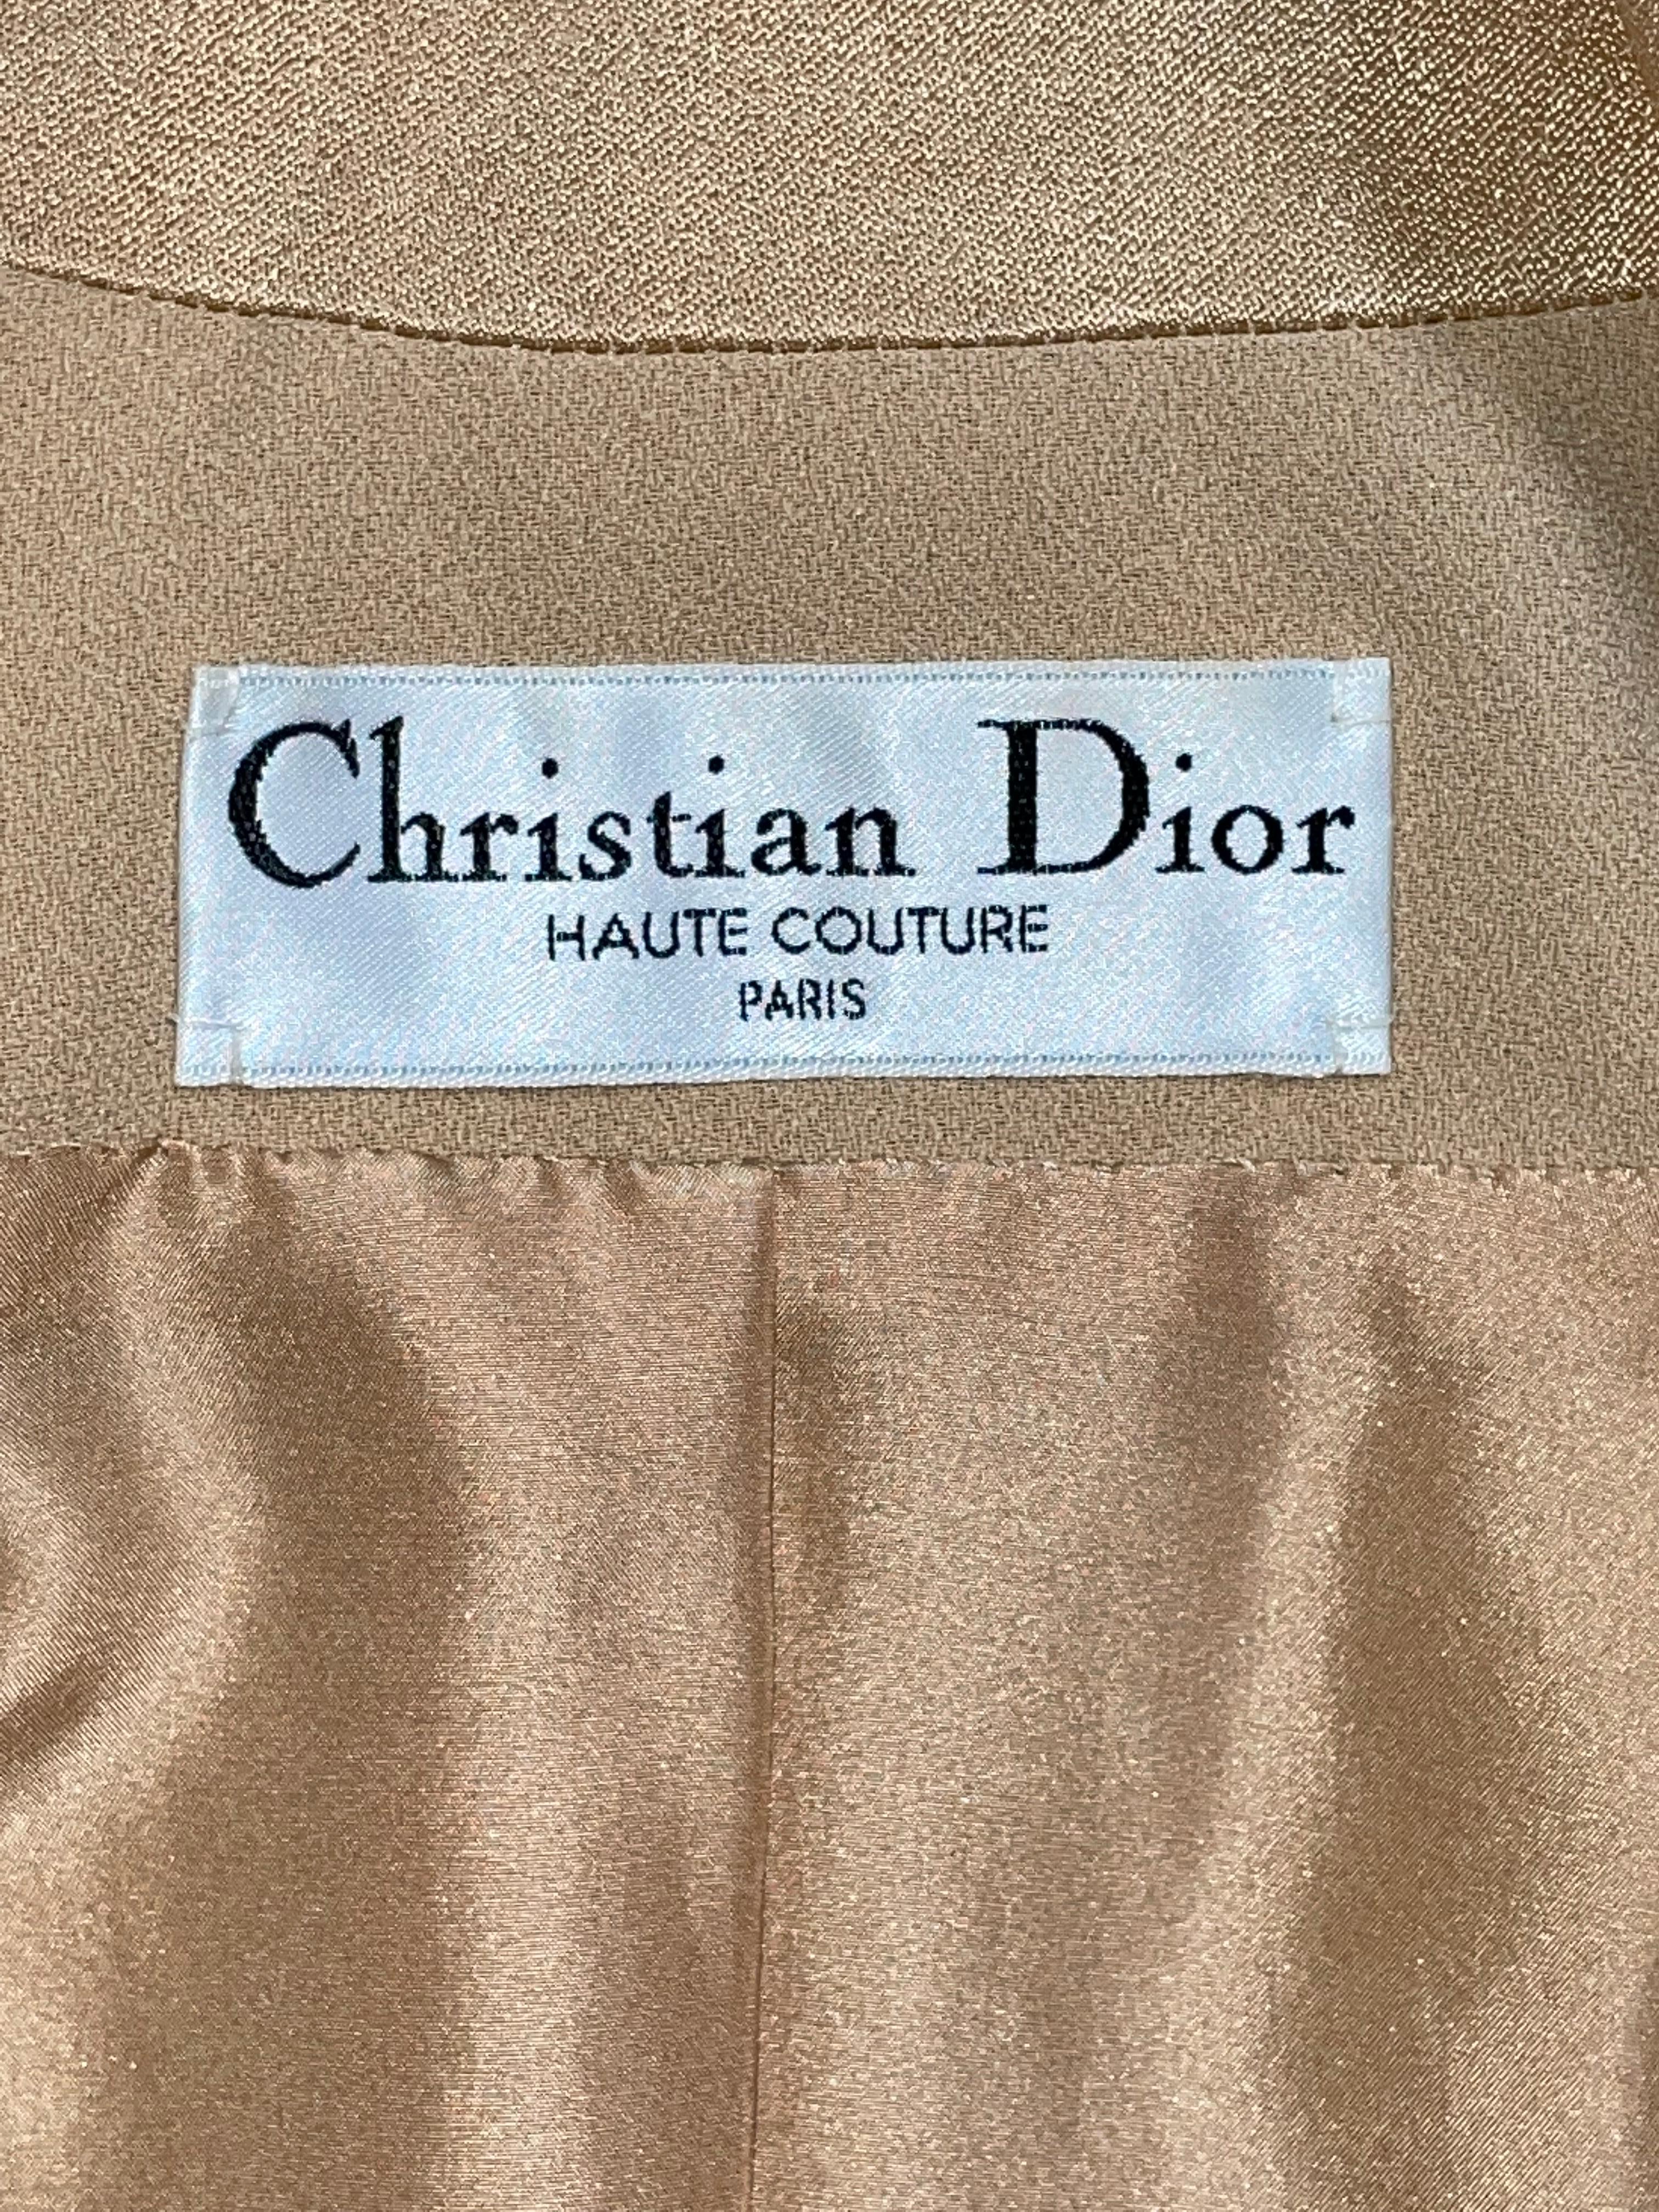 C. F/W 2008 Christian Dior John Galliano Haute Couture Gold Nude Pant Suit 1